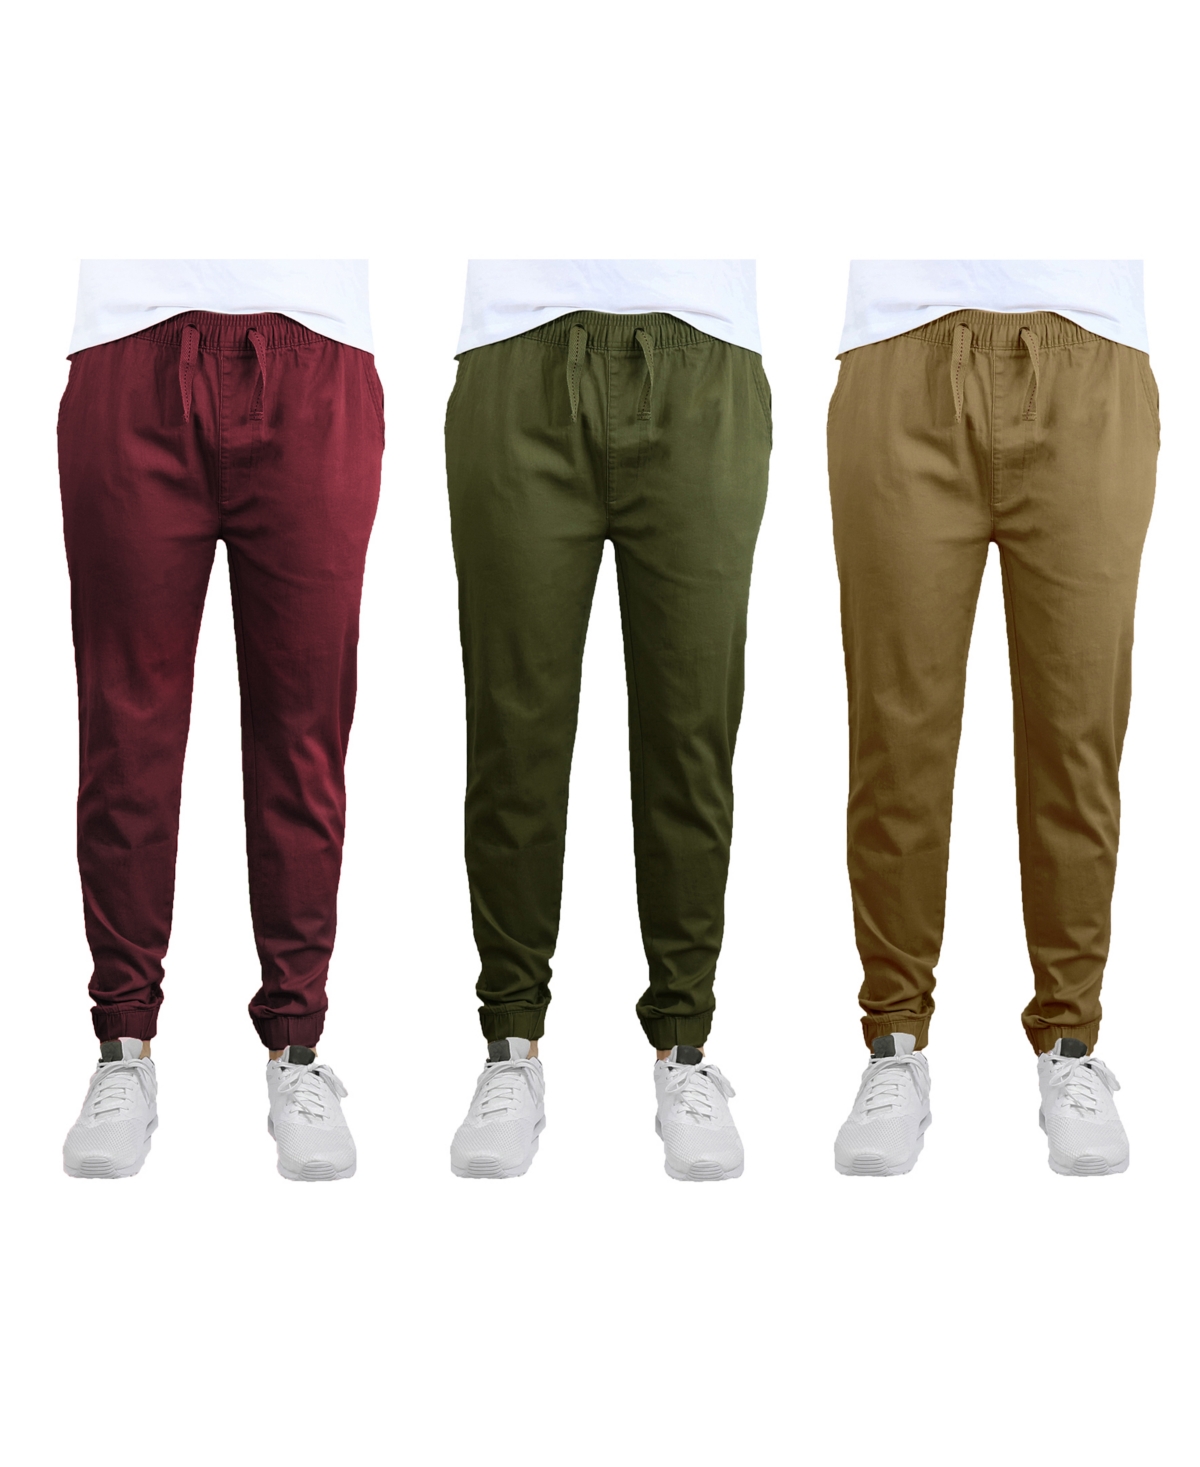 Galaxy By Harvic Men's Slim Fit Basic Stretch Twill Joggers, Pack Of 3 In Burgundy,olive And Timber